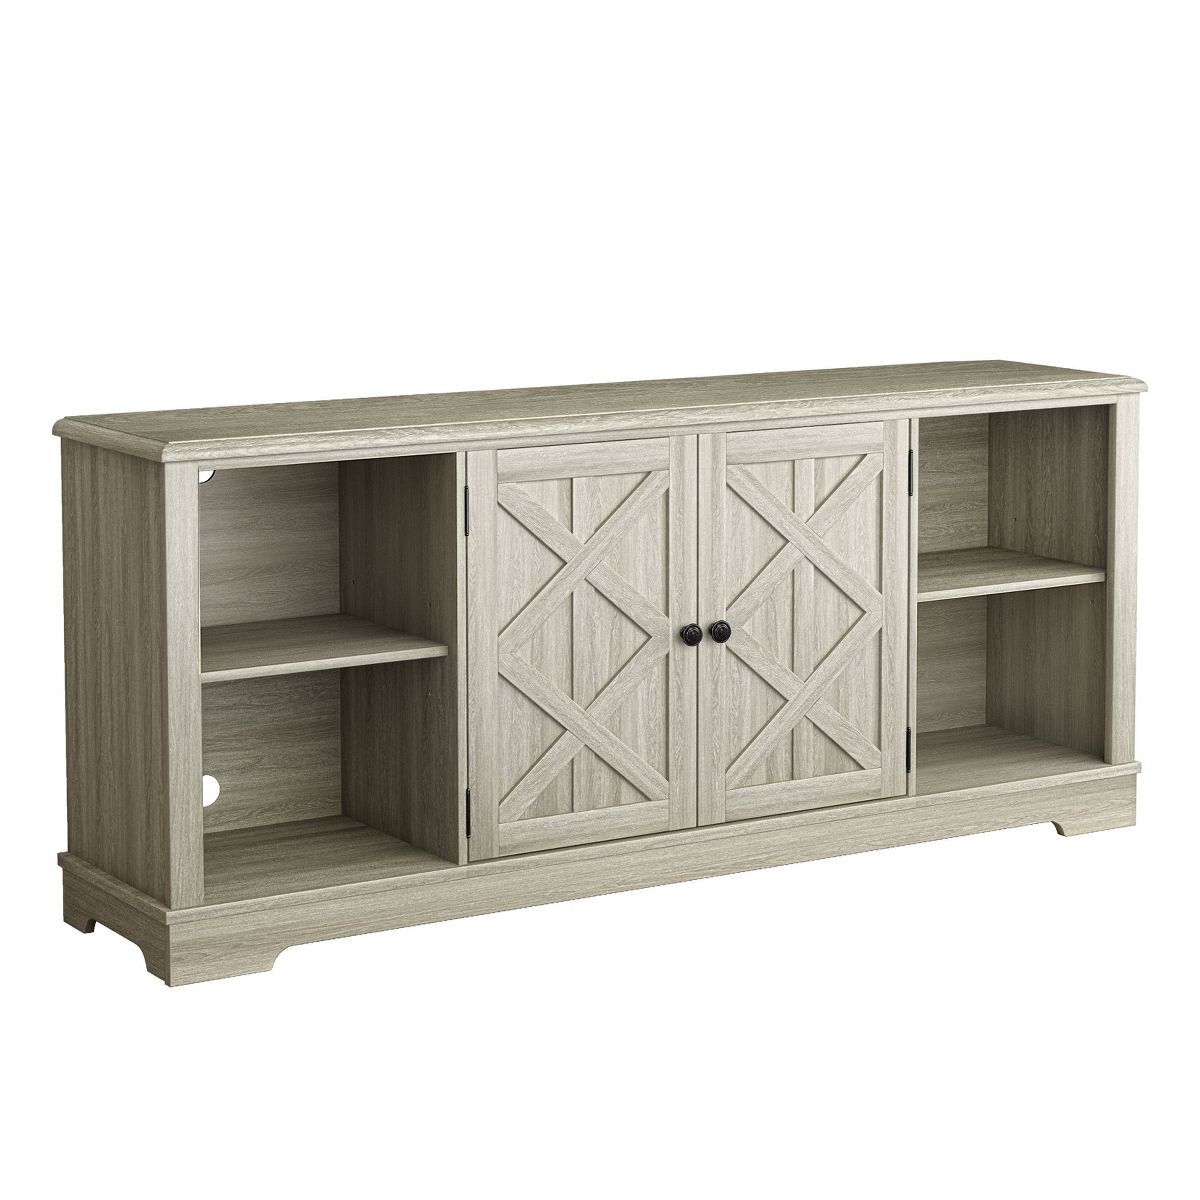 70" Farmhouse Style TV Stand for TVs up to 78" - Festivo | Target